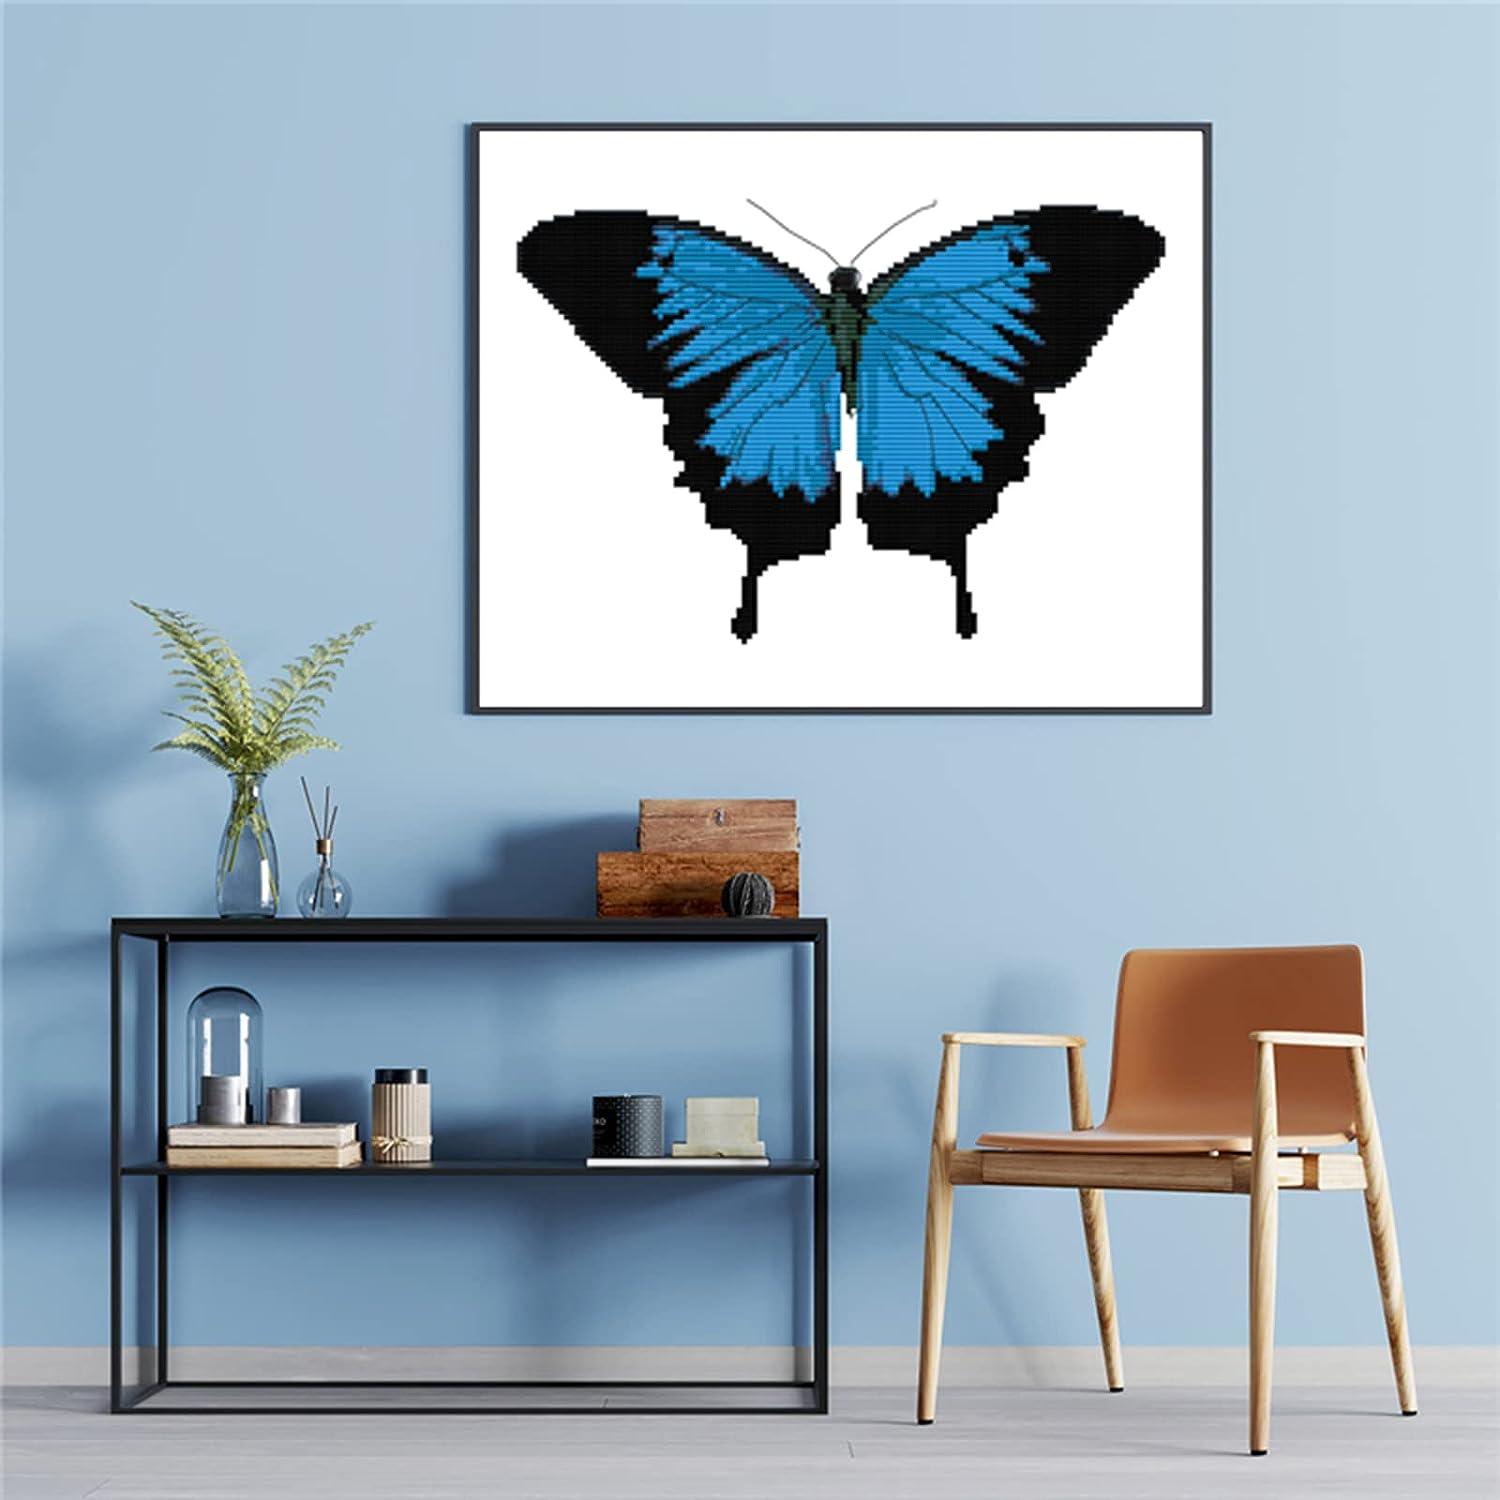 Stamped Cross Stitch Kits Full Range of Crossstitching Kits Preprinted Easy  Patterns Embroidery kit for Beginner Printed Cross-Stitch for Home Decor  11CT 3 Strands-Ulysses Butterfly 16x13.8(inch)